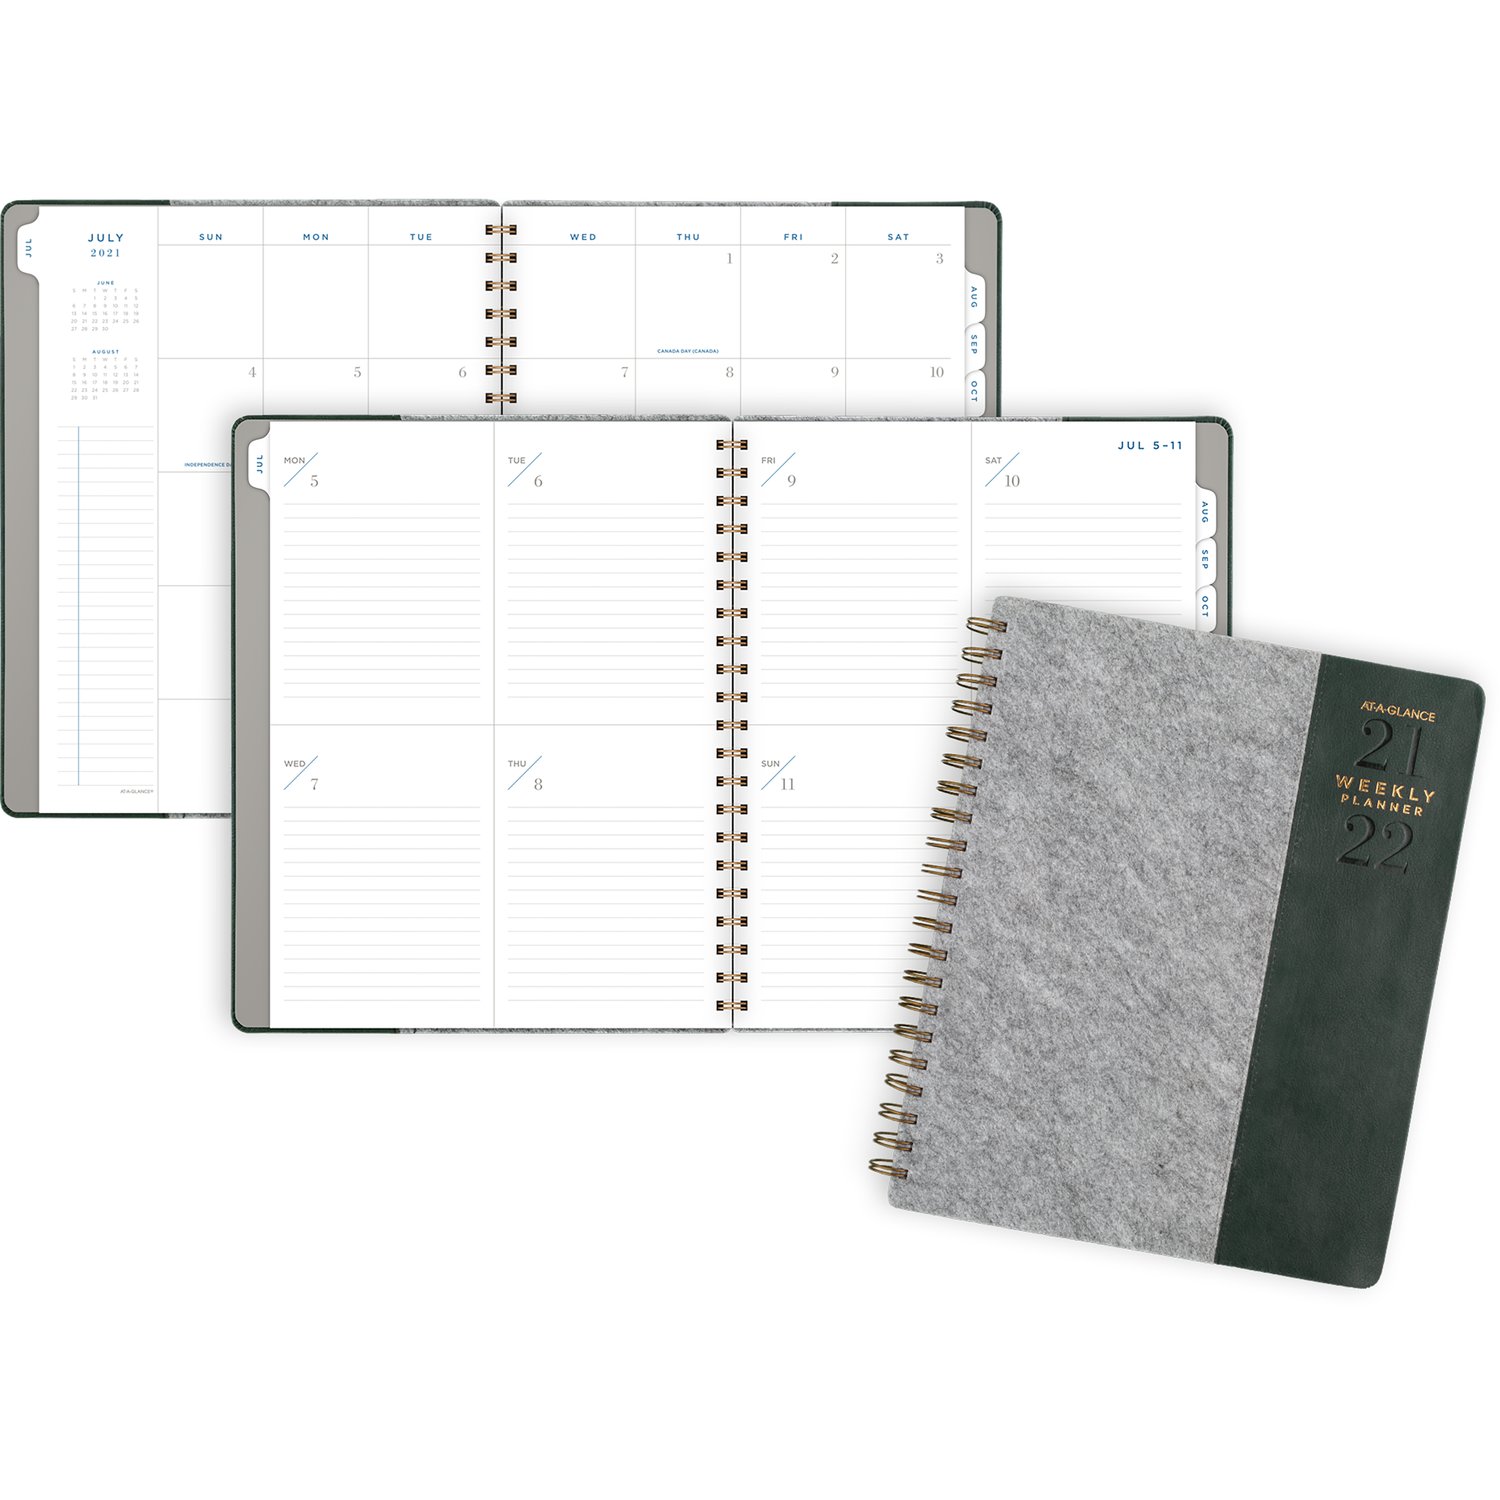 At A Glance Gray Academic Year 21-22 Planner 8x11